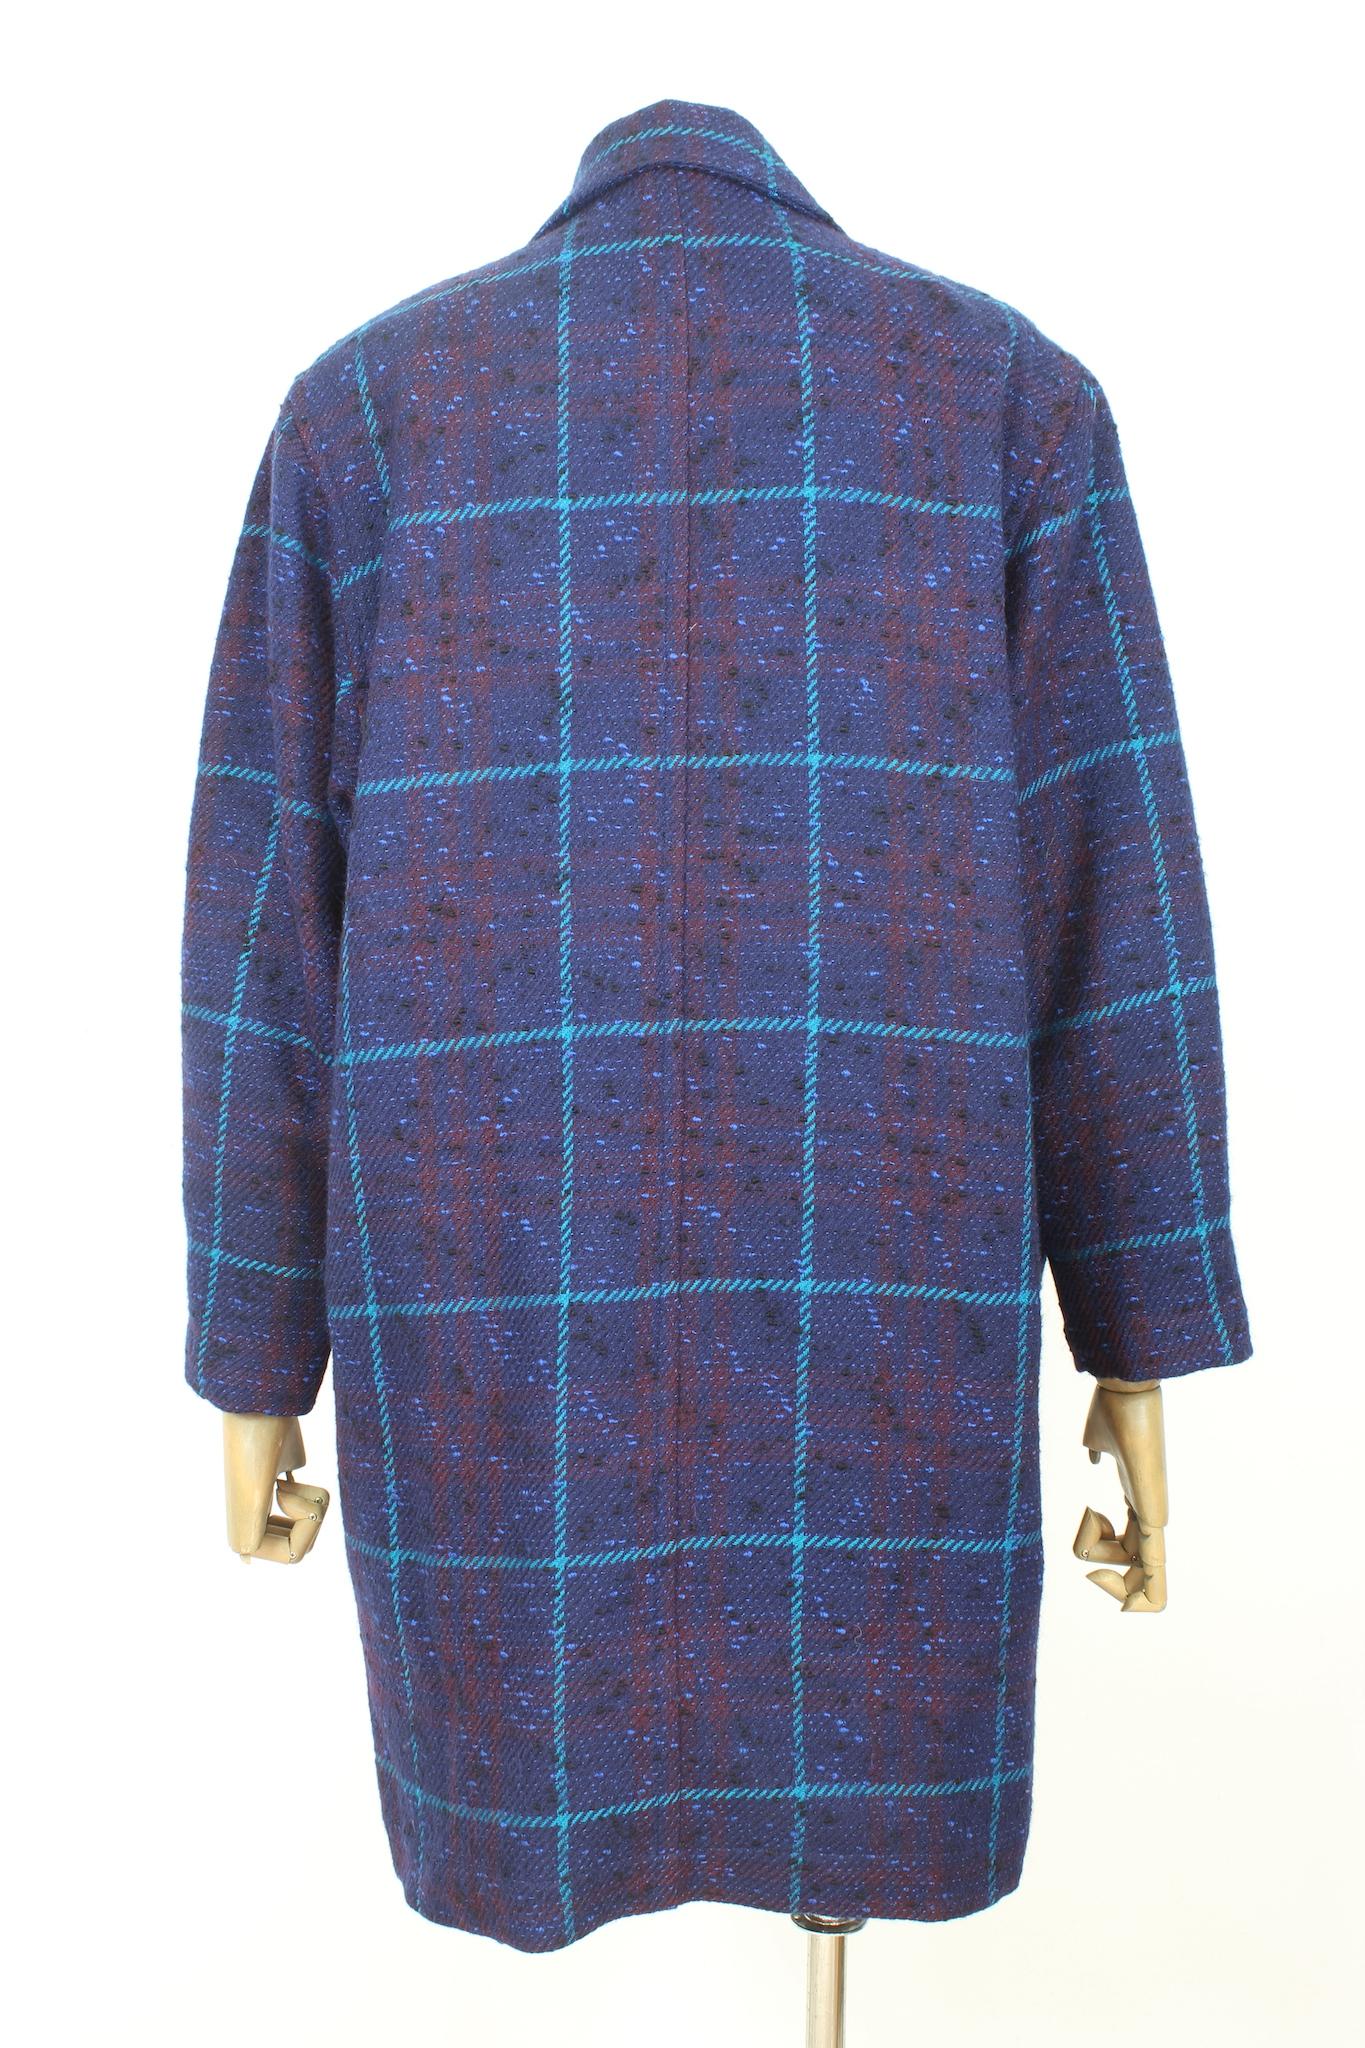 Byblos vintage 80s oversized coat. Purple and blue checked, boucle pattern, wool fabric, the upper part of the coat is internally lined. Made in Italy.

Size: 40 It 6 Us 8 Uk

Shoulder: 50 cm
Bust/Chest: 57 cm
Sleeve: 59 cm
Length: 98 cm